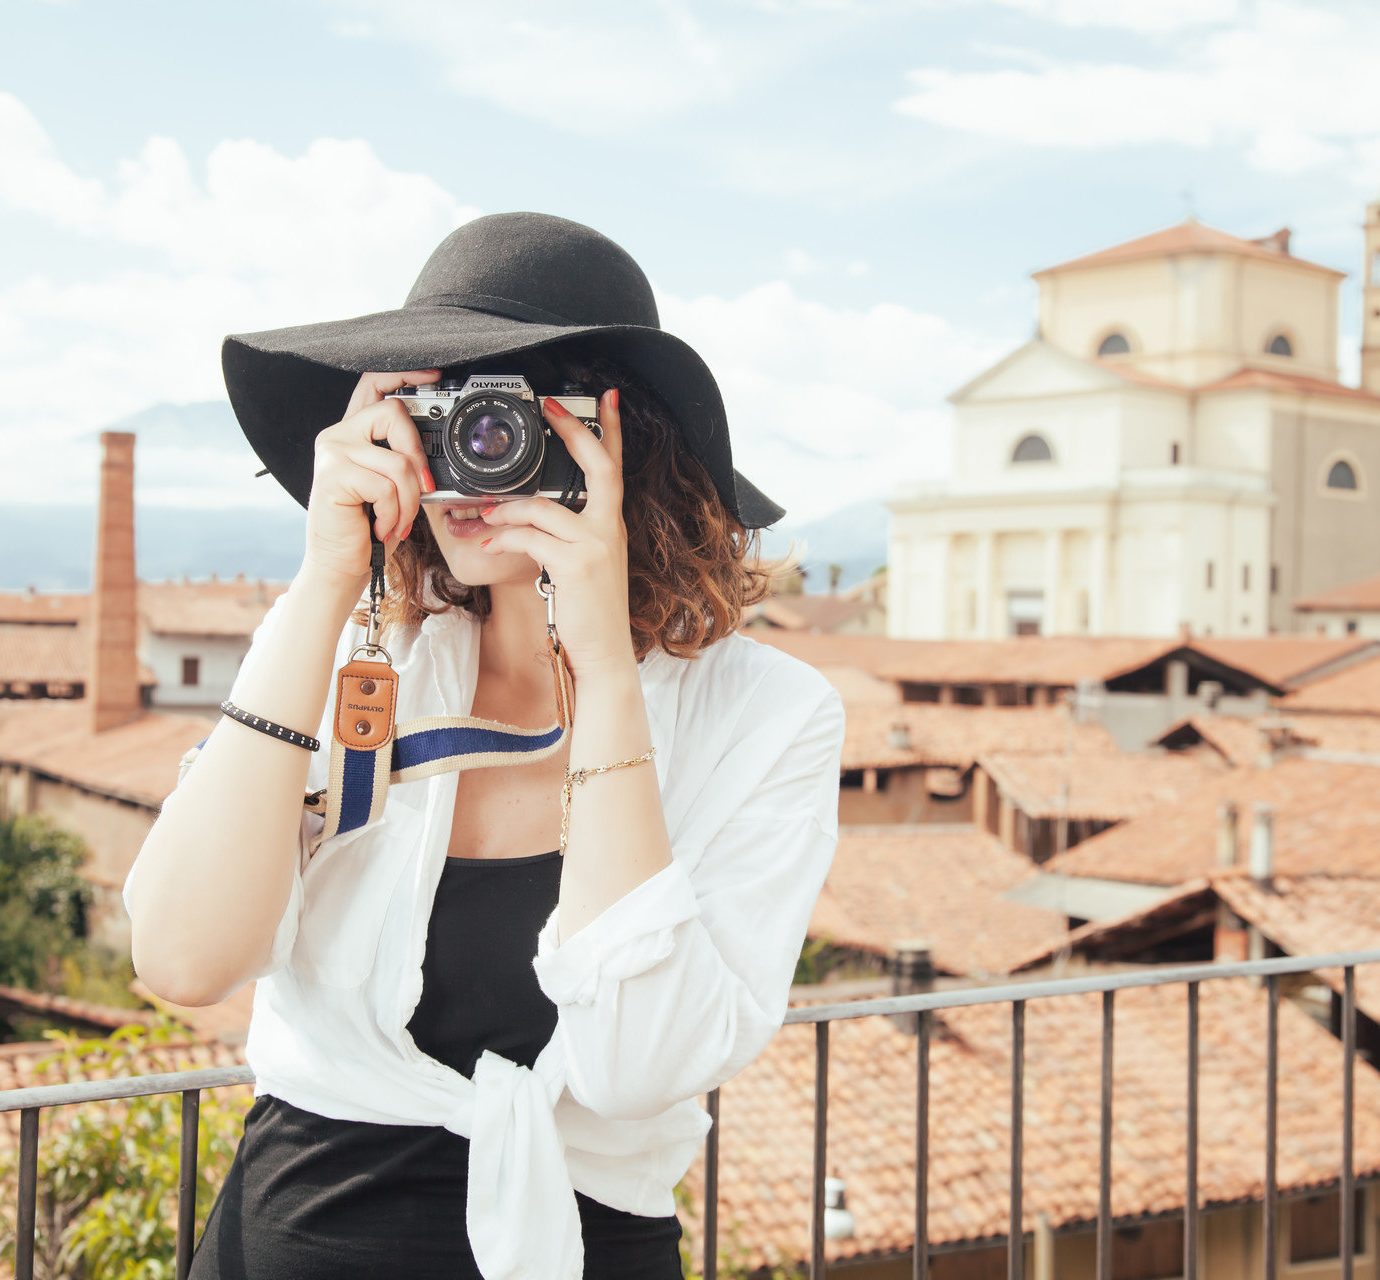 Buildings camera charming City city views europe Ocean ocean view people photography quaint rooftops sun hat tourist Town Travel Tech Travel Tips view viewpoint woman sky outdoor person clothing spring anime